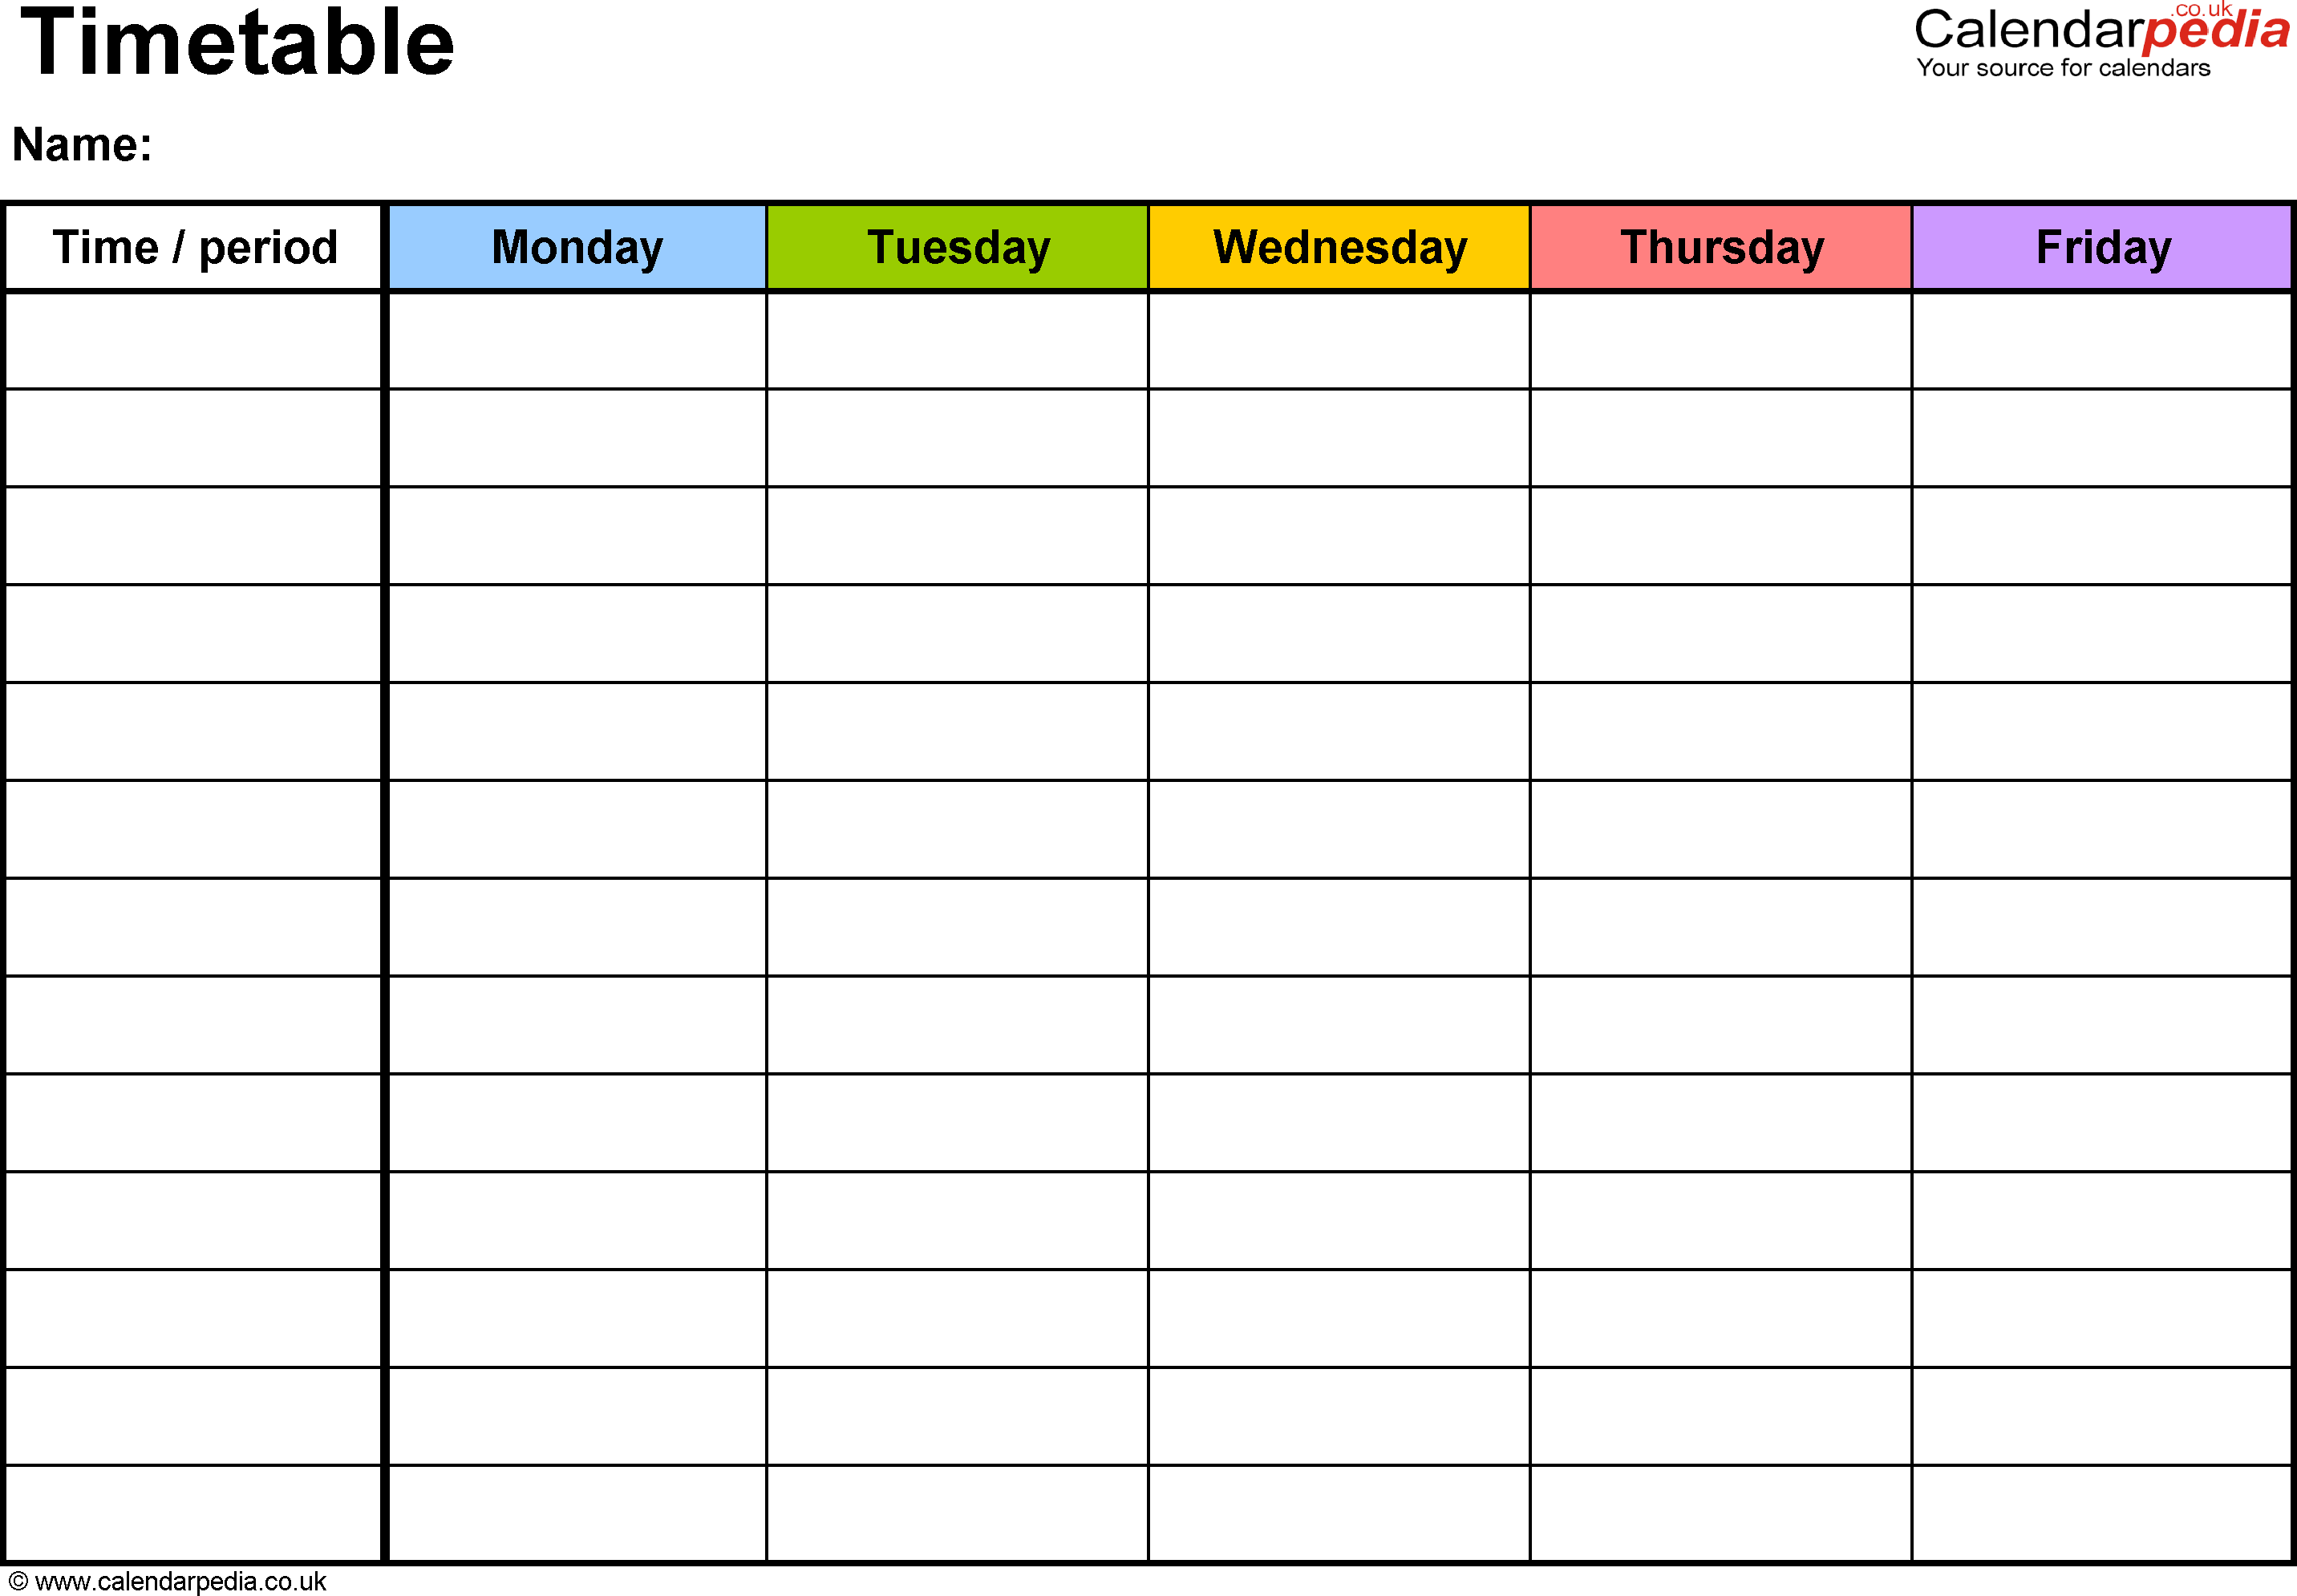 Word Timetable Template 2  Landscape Format A4 1 Page Monday To